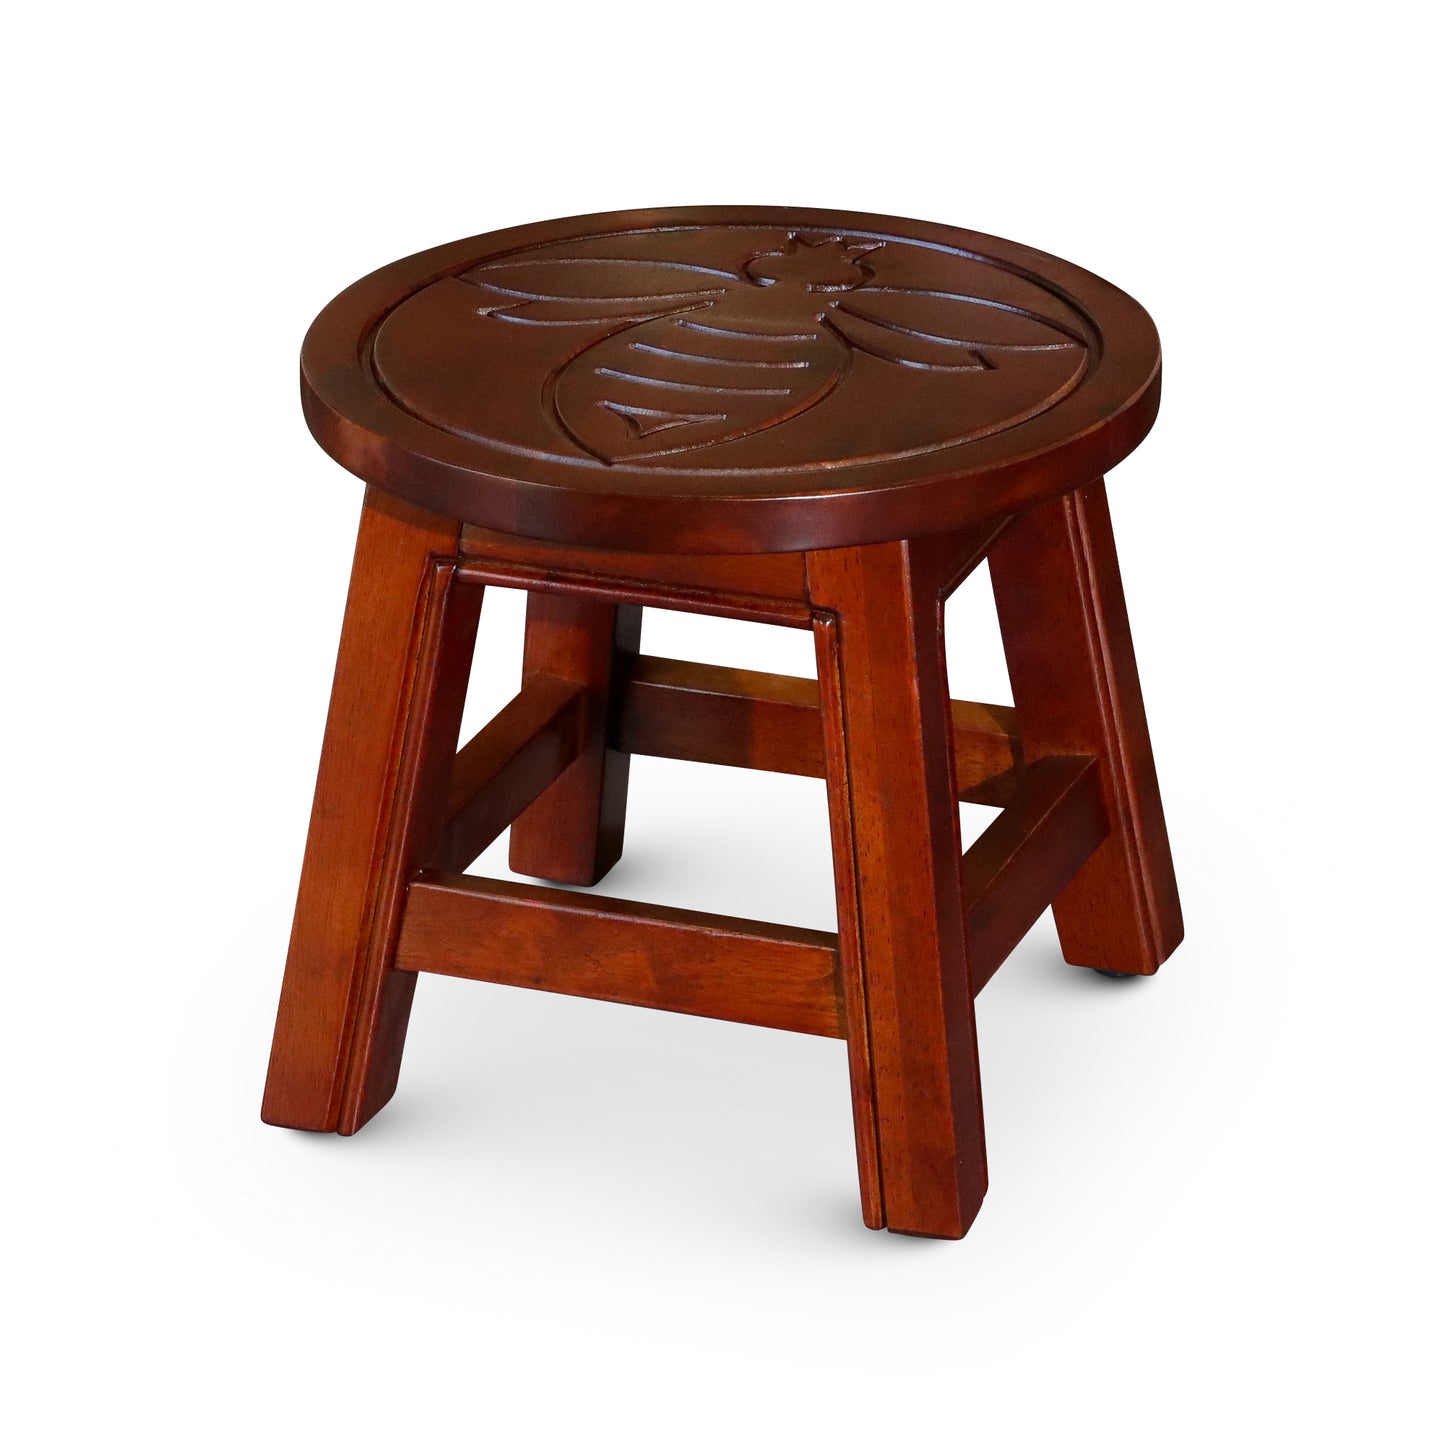 Carved Wooden Step Stool, Queen Bee, Cherry